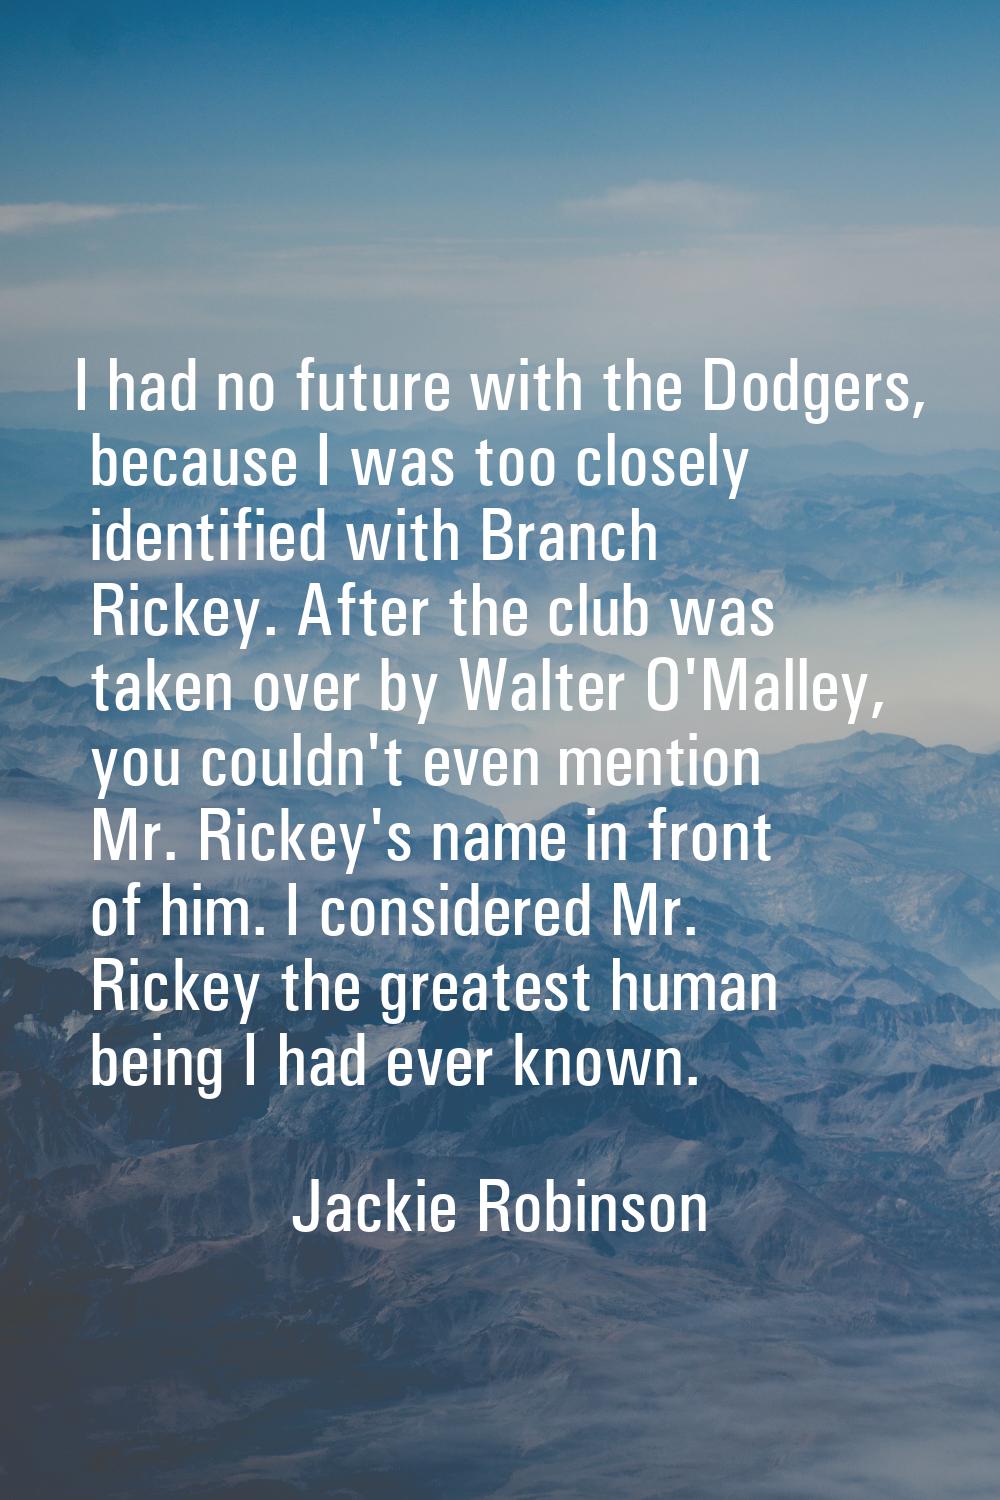 I had no future with the Dodgers, because I was too closely identified with Branch Rickey. After th